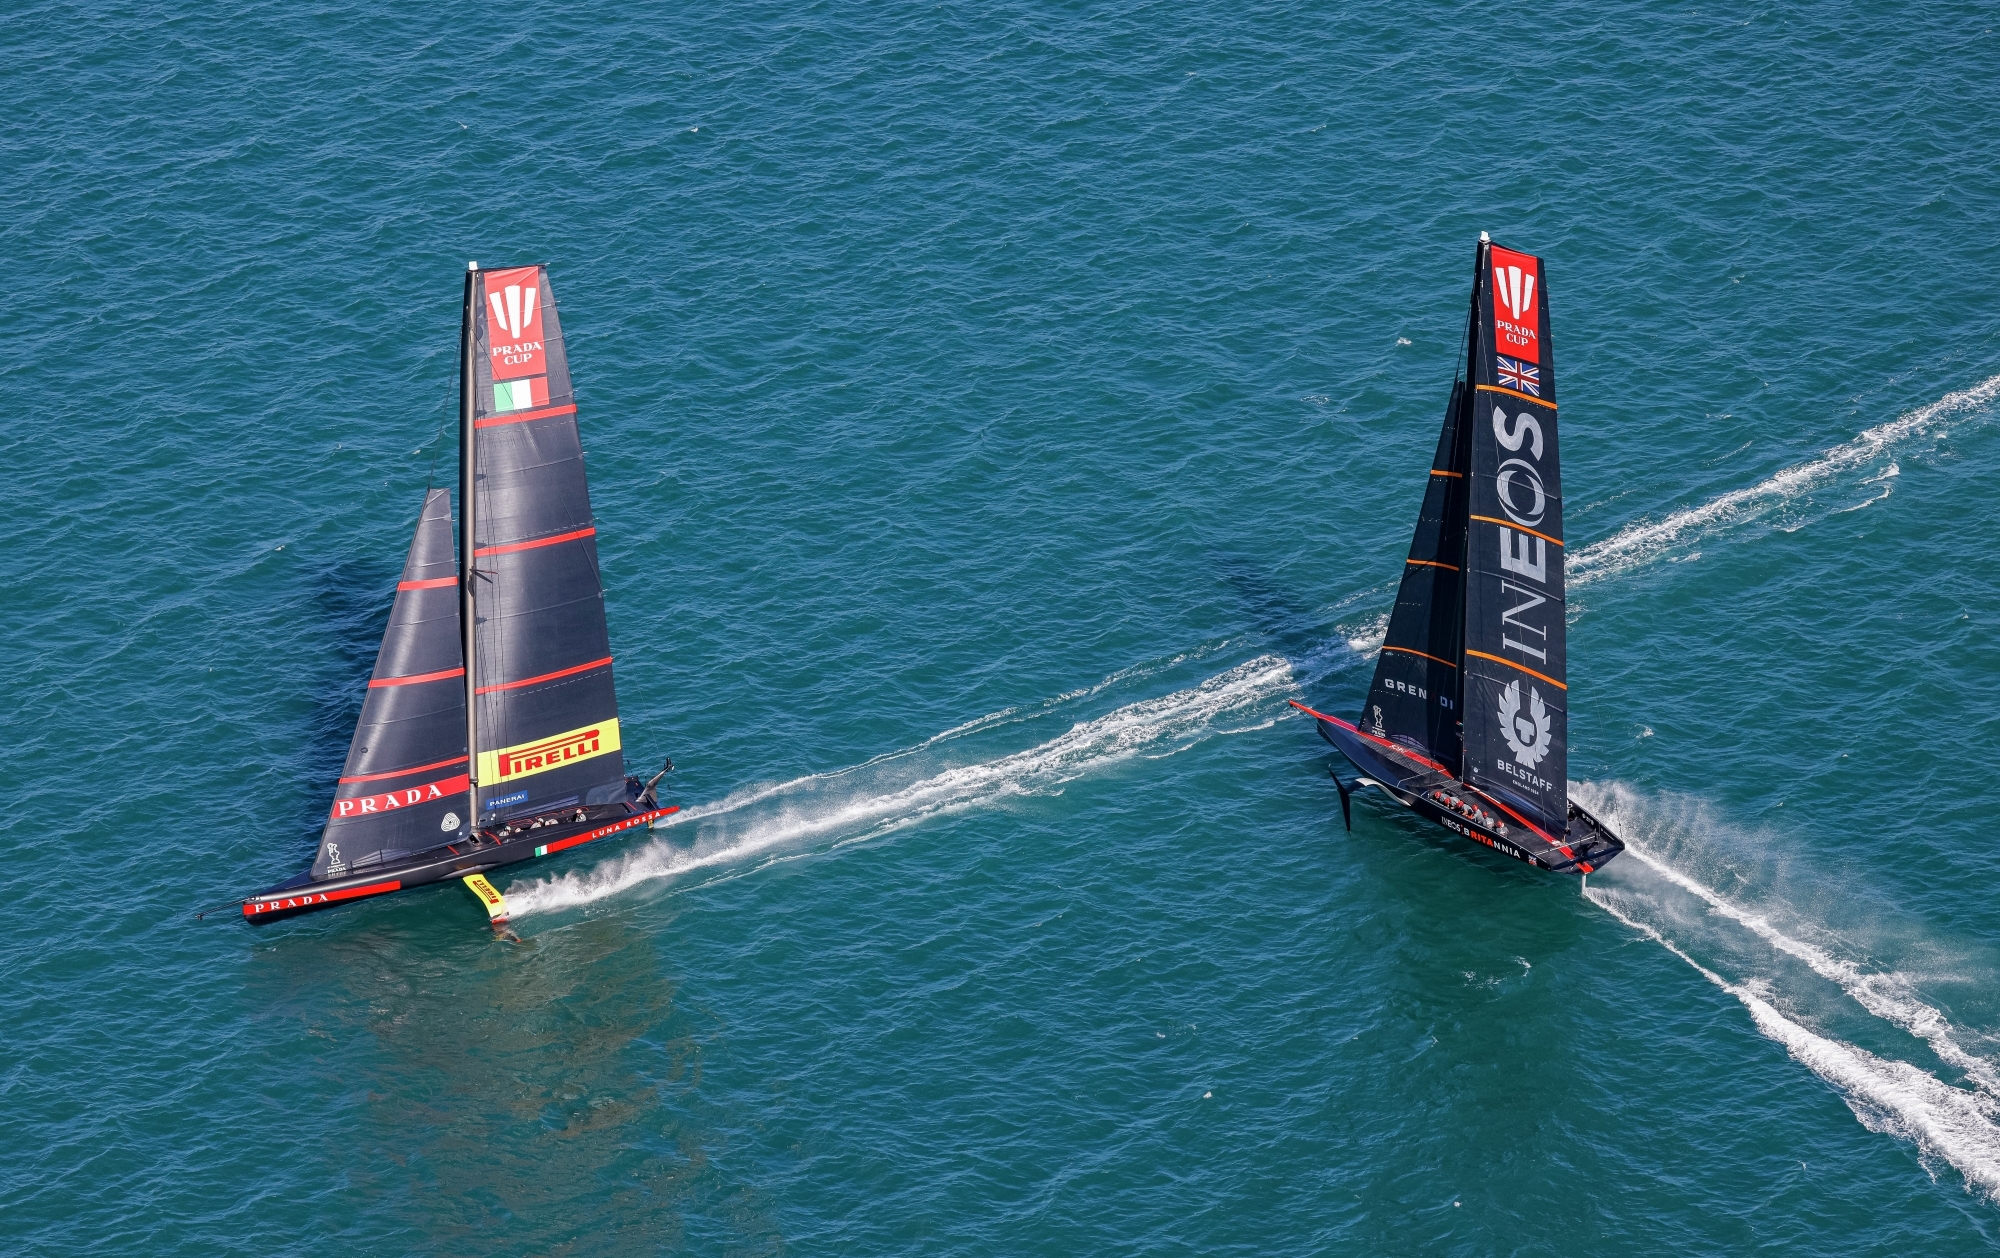  Prada Cup  Auckland NZL  Final  Two victories for Luna Rossa